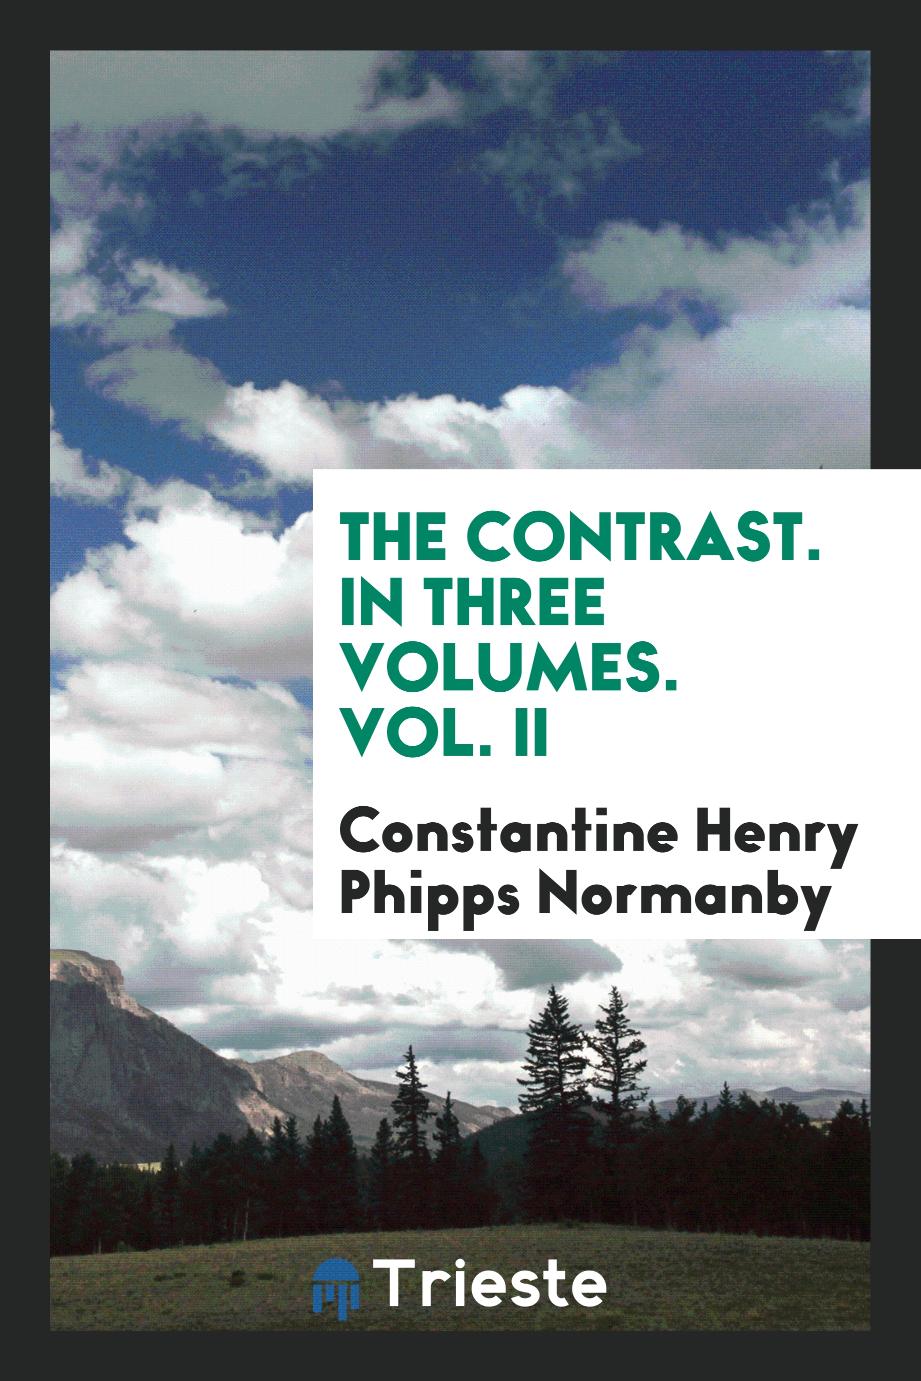 The contrast. In three volumes. Vol. II